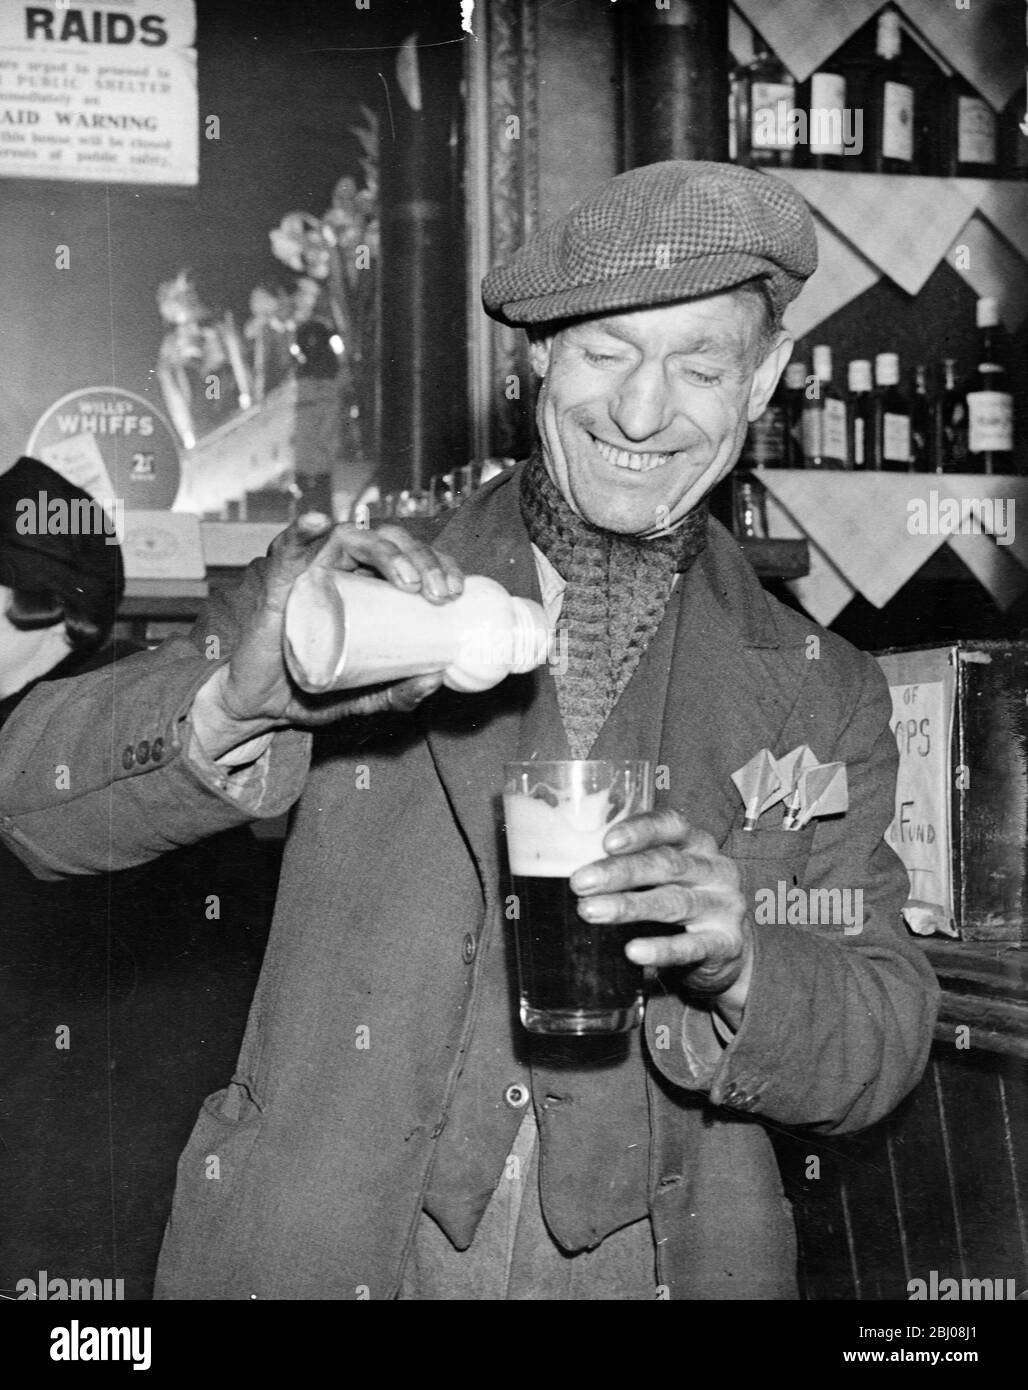 Man pours ground ginger in his pint of beer. As practised by stevedores and dockers during cold weather, ground ginger is found in many riverside inns near wharves, though elsewhere it is a rare relic of olden times. - Greenwich, Kent, England. - 15 January 1940 - Stock Photo